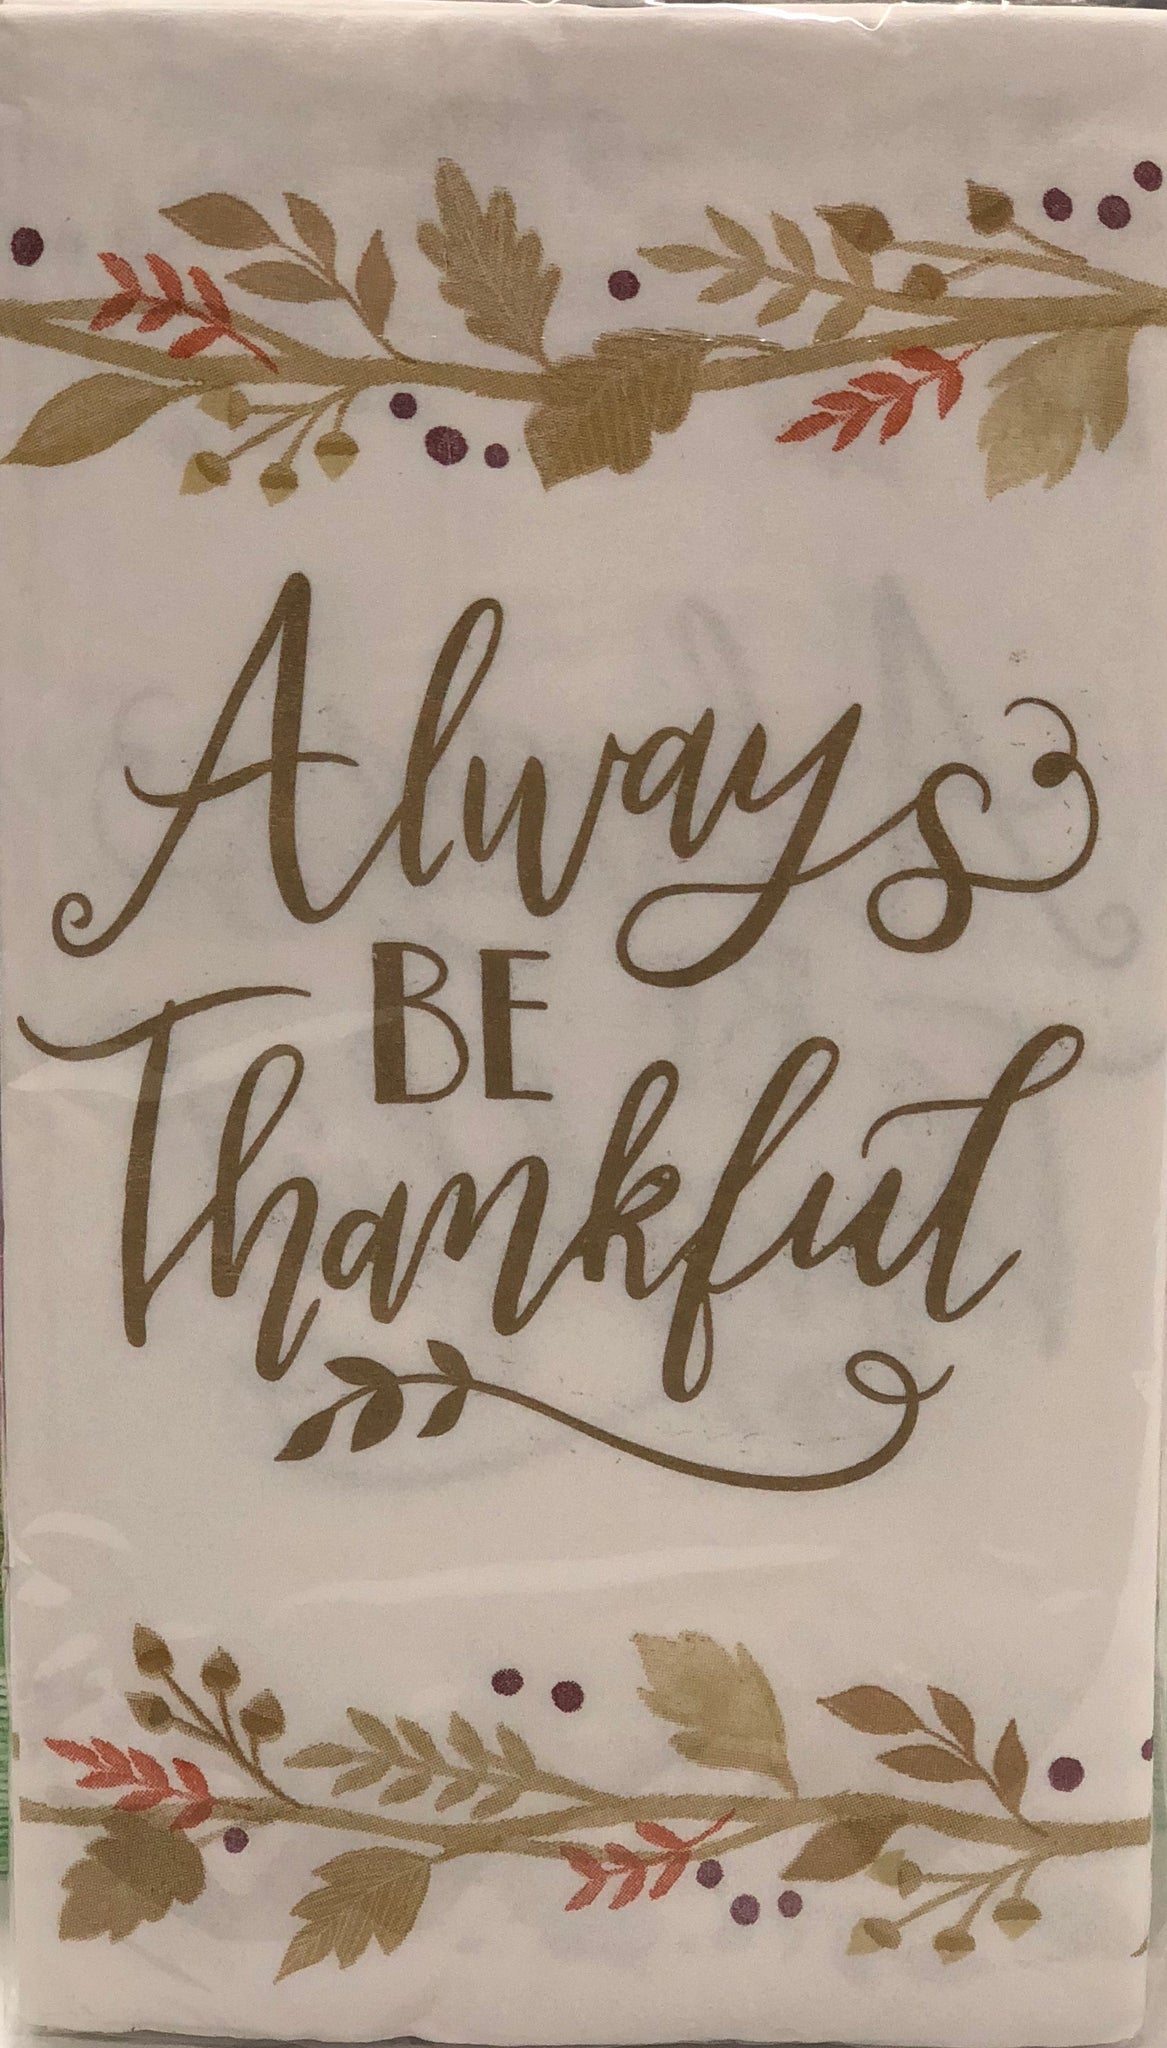 Guest Towel Napkin- Always be thankful